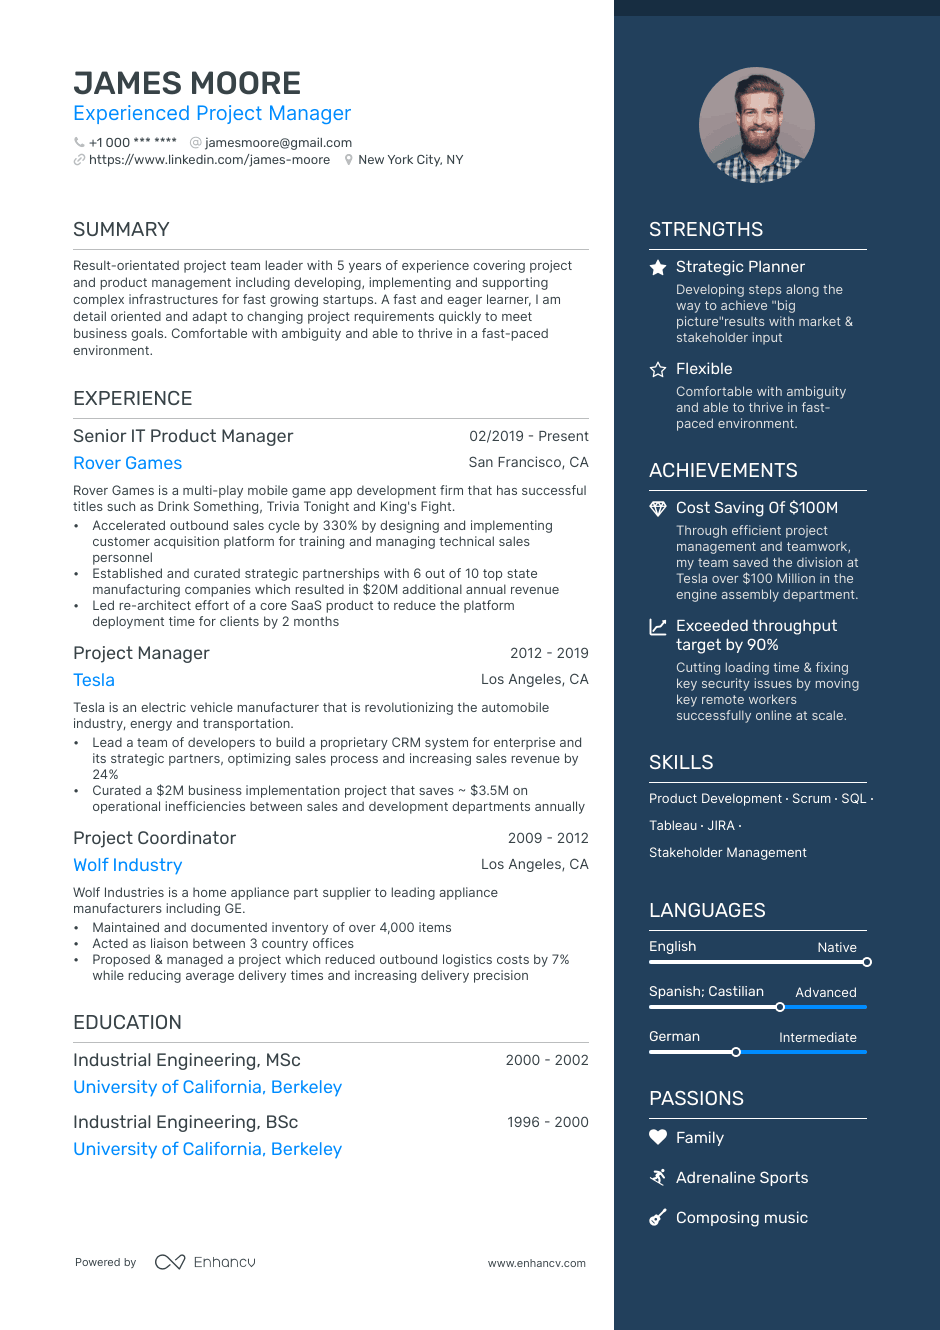 Experienced Project Manager resume example